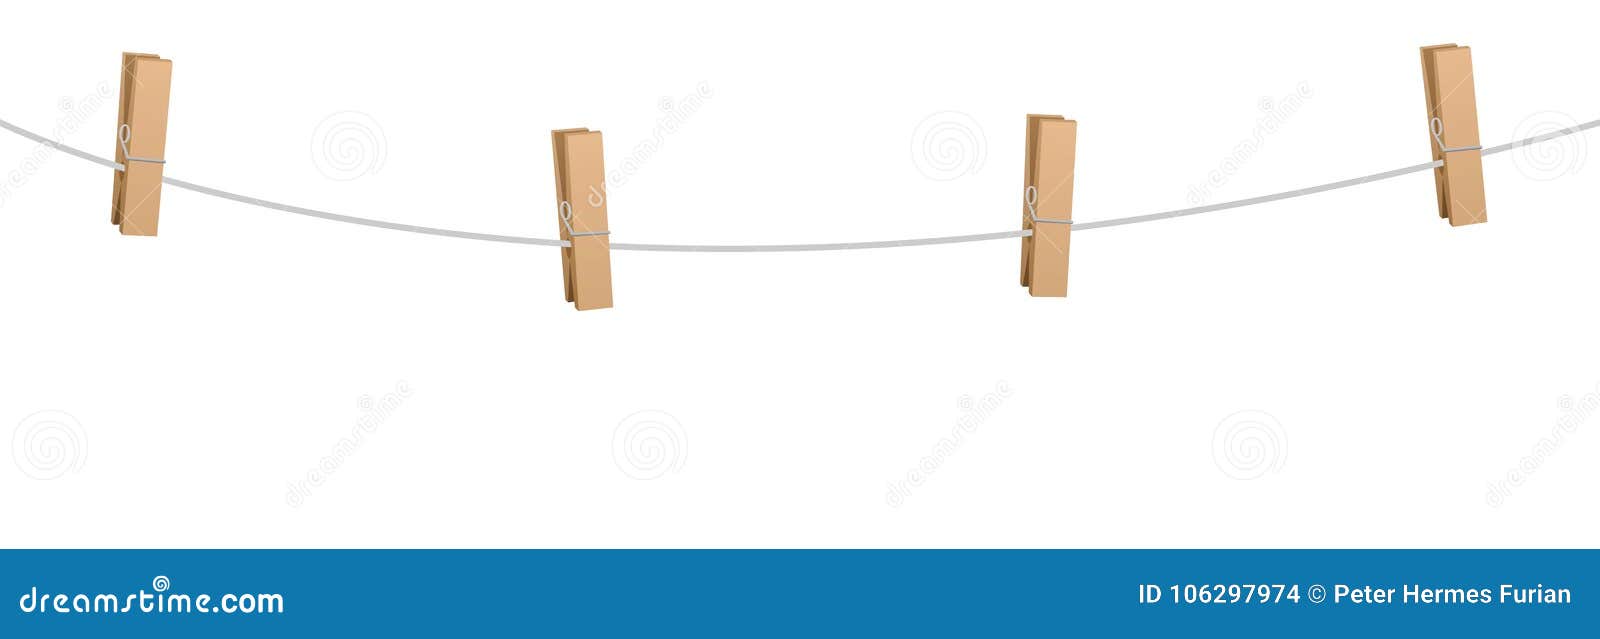 Clothes Pins Four Wooden Pegs Clothes Line Rope Stock Vector